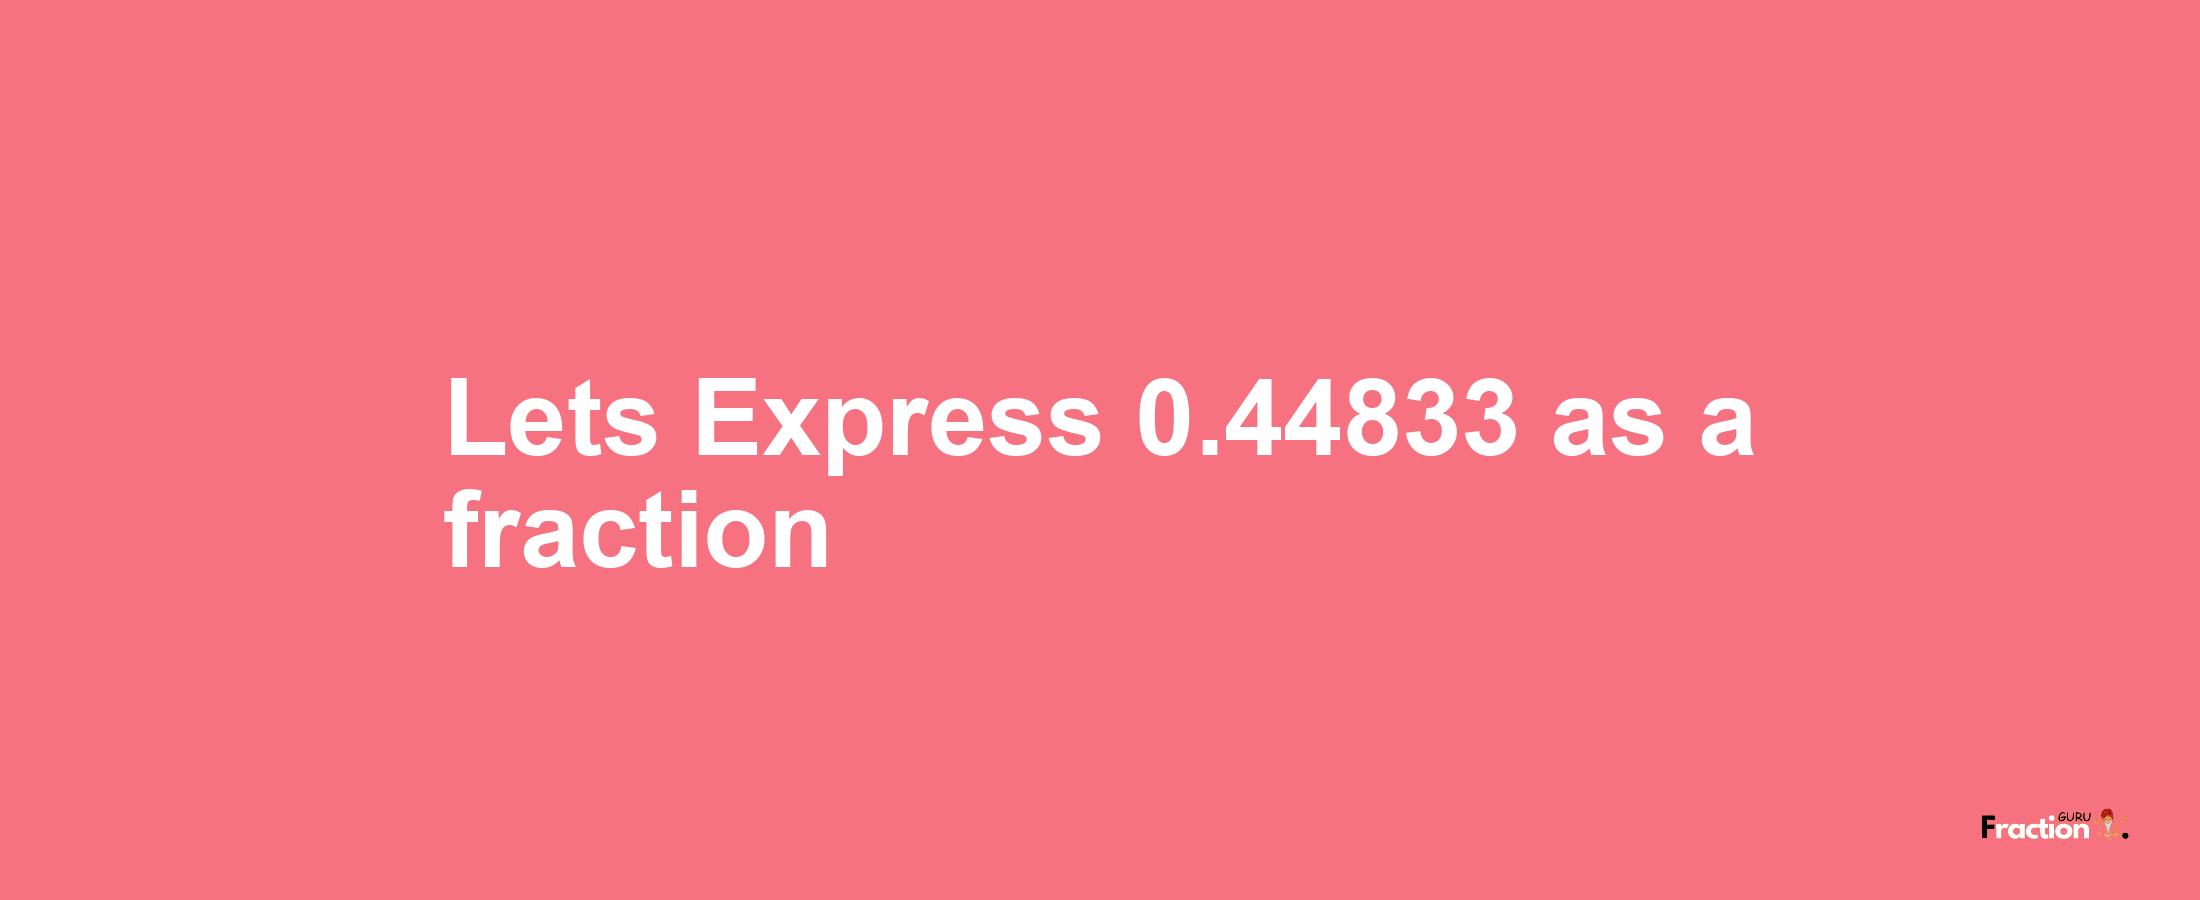 Lets Express 0.44833 as afraction